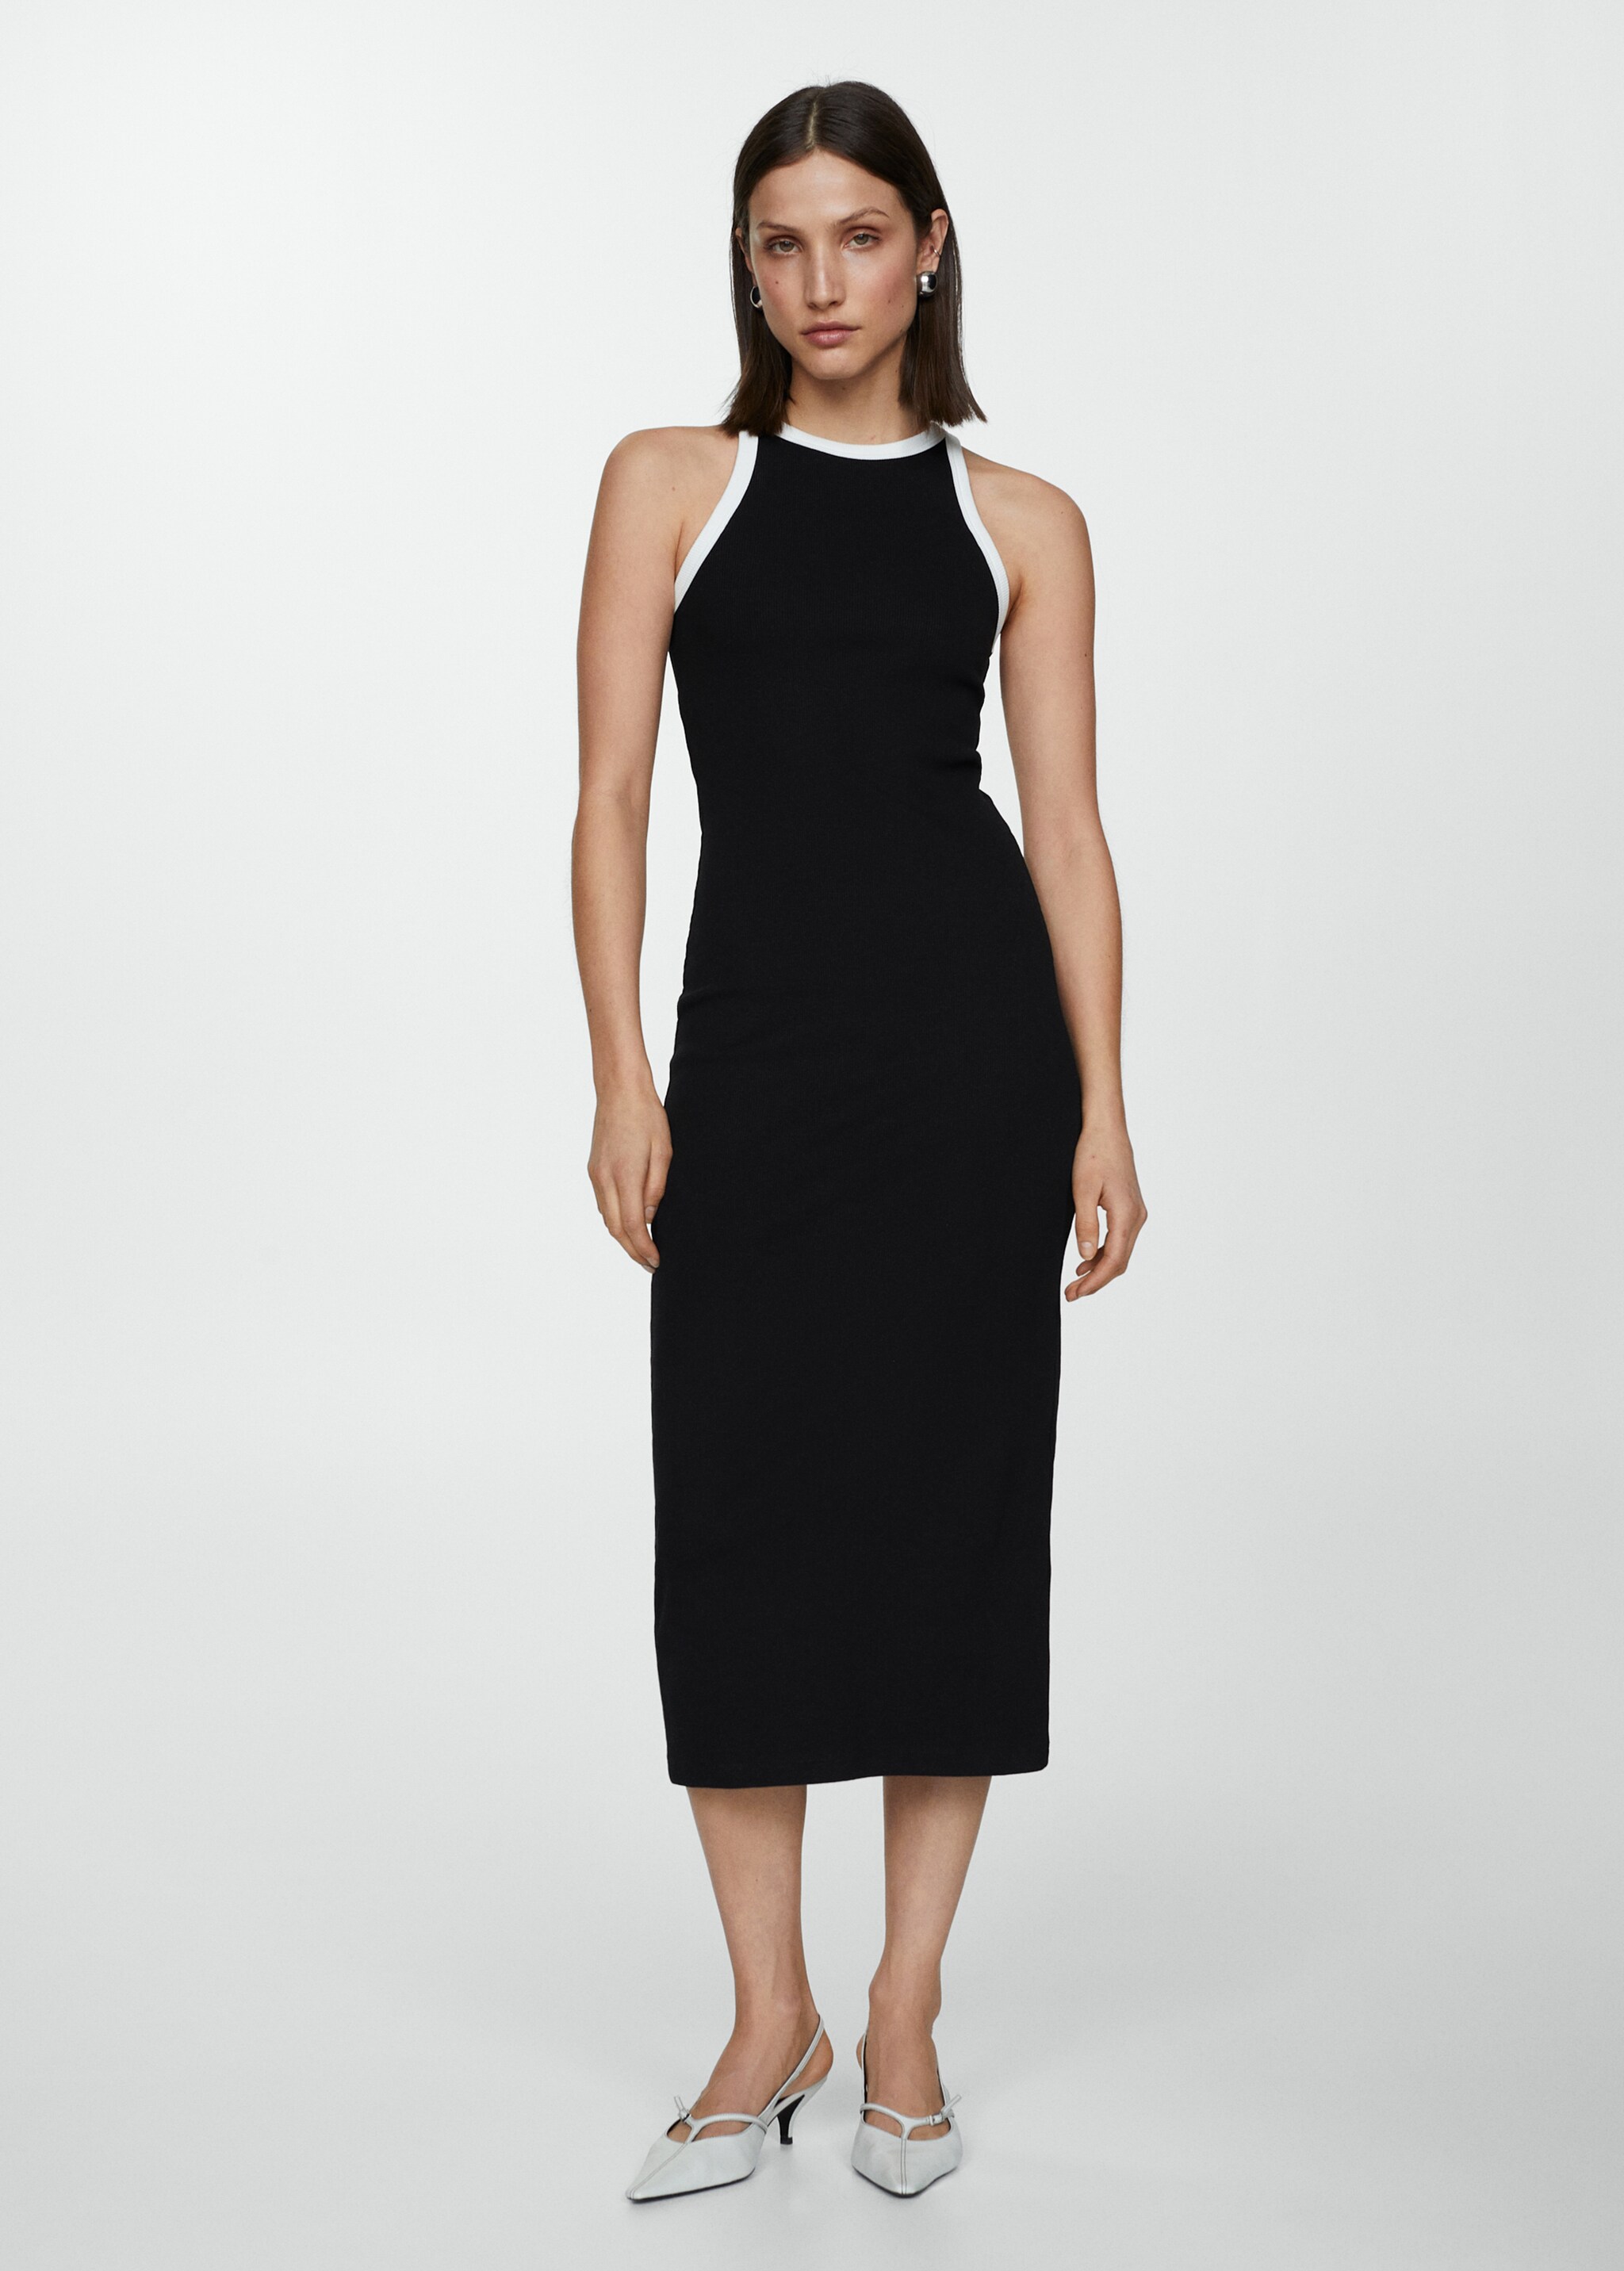 Contrast ribbed knit dress - General plane